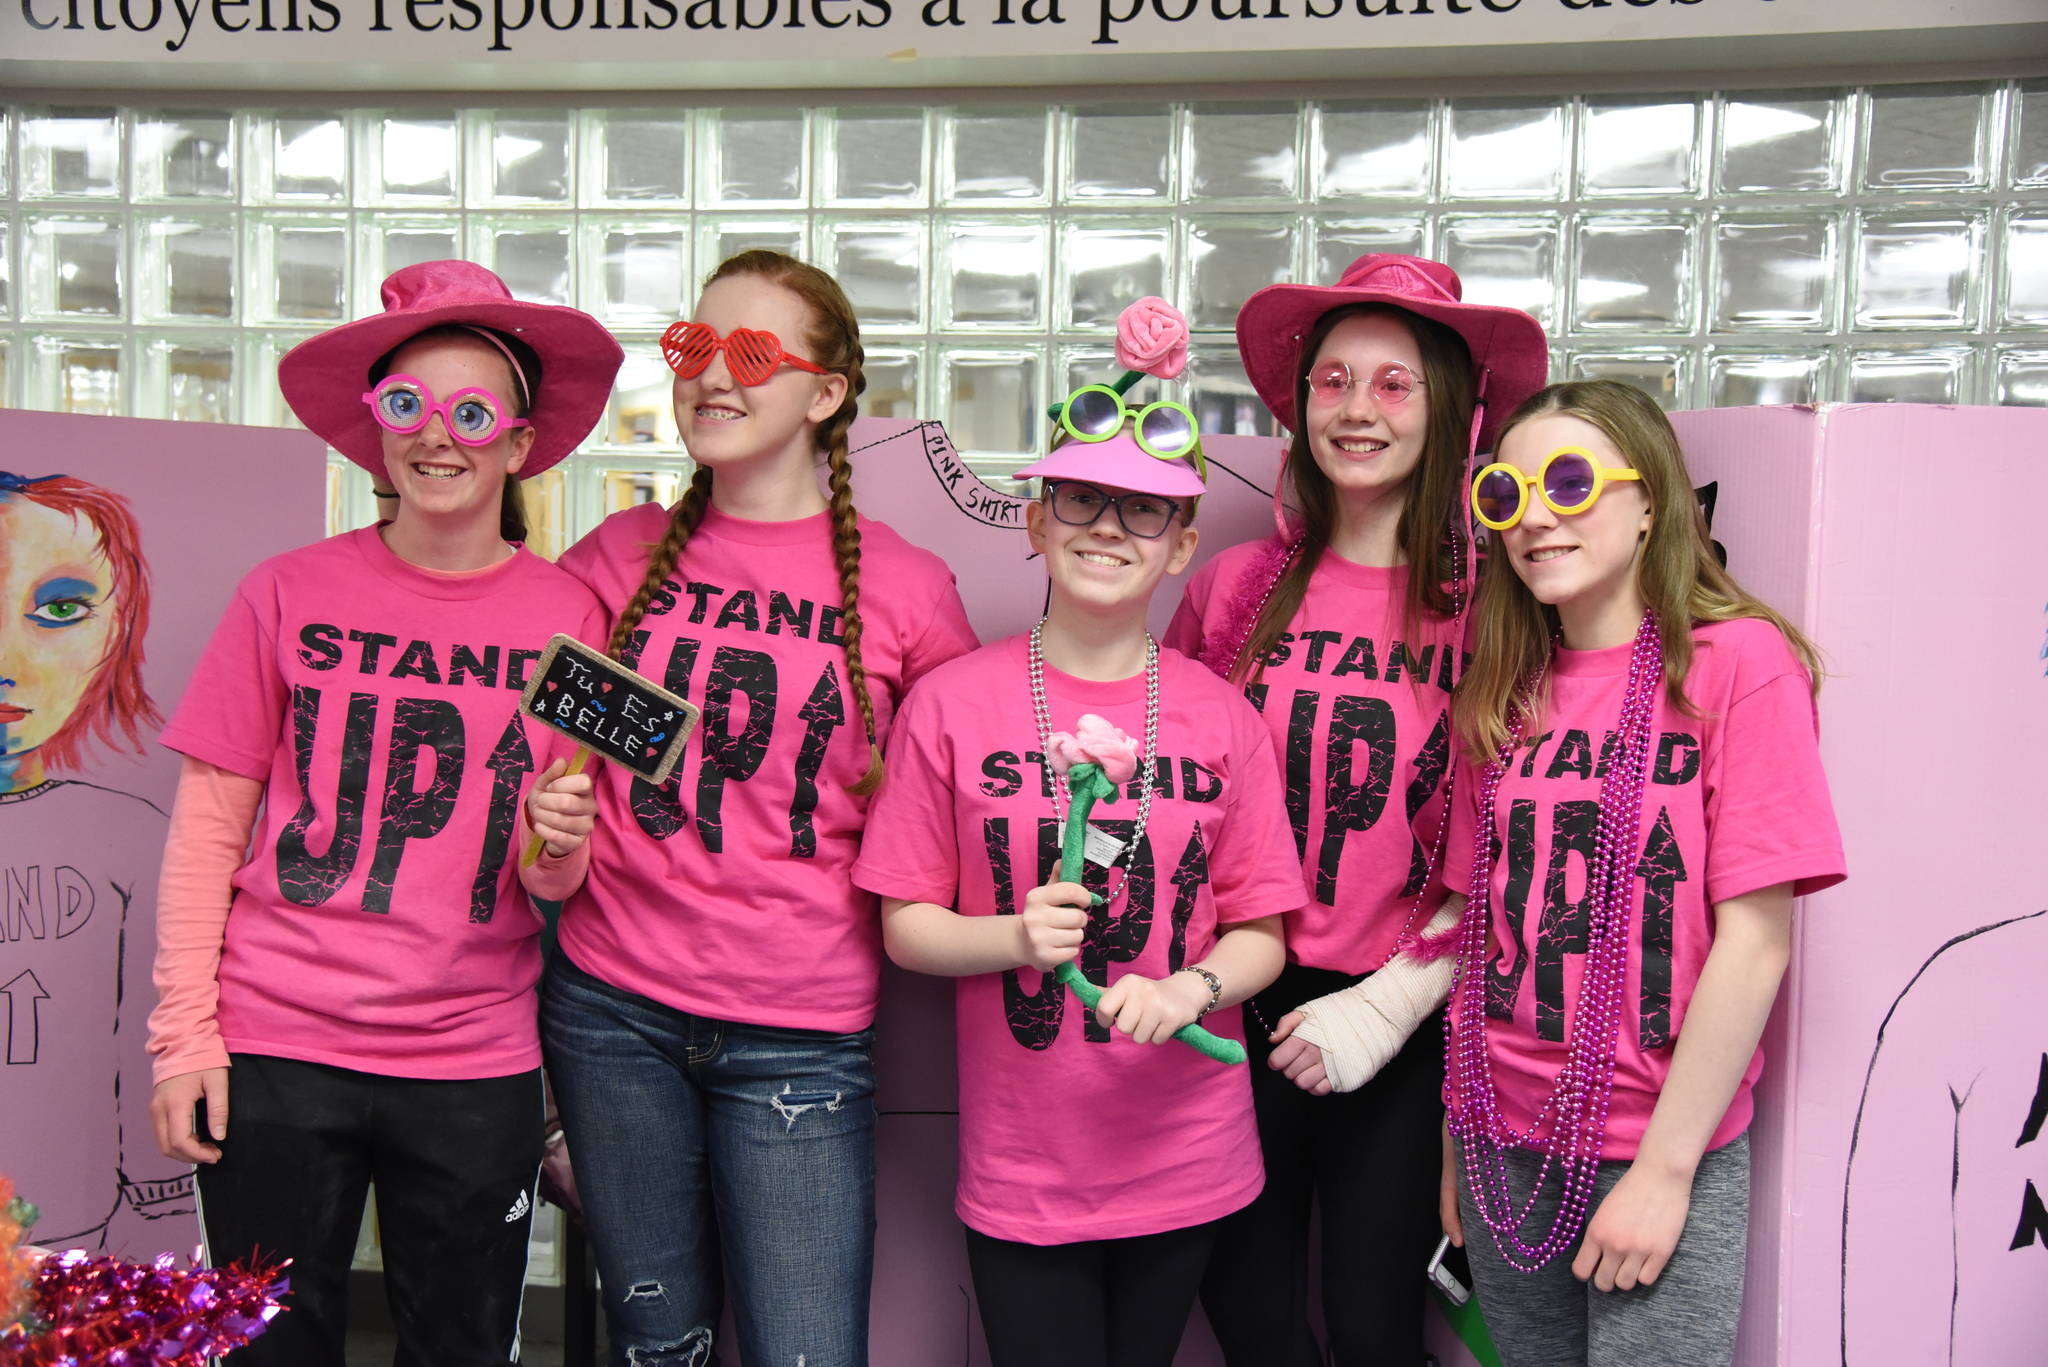 PRETTY IN PINK - Grade 8 students Ella Damberge, Nevaeh Stevenson, Taylor Hill, Grace Bernier and Sophie Schmidt take part in Pink Shirt Day at Central Middle School. Michelle Falk/Red Deer Express